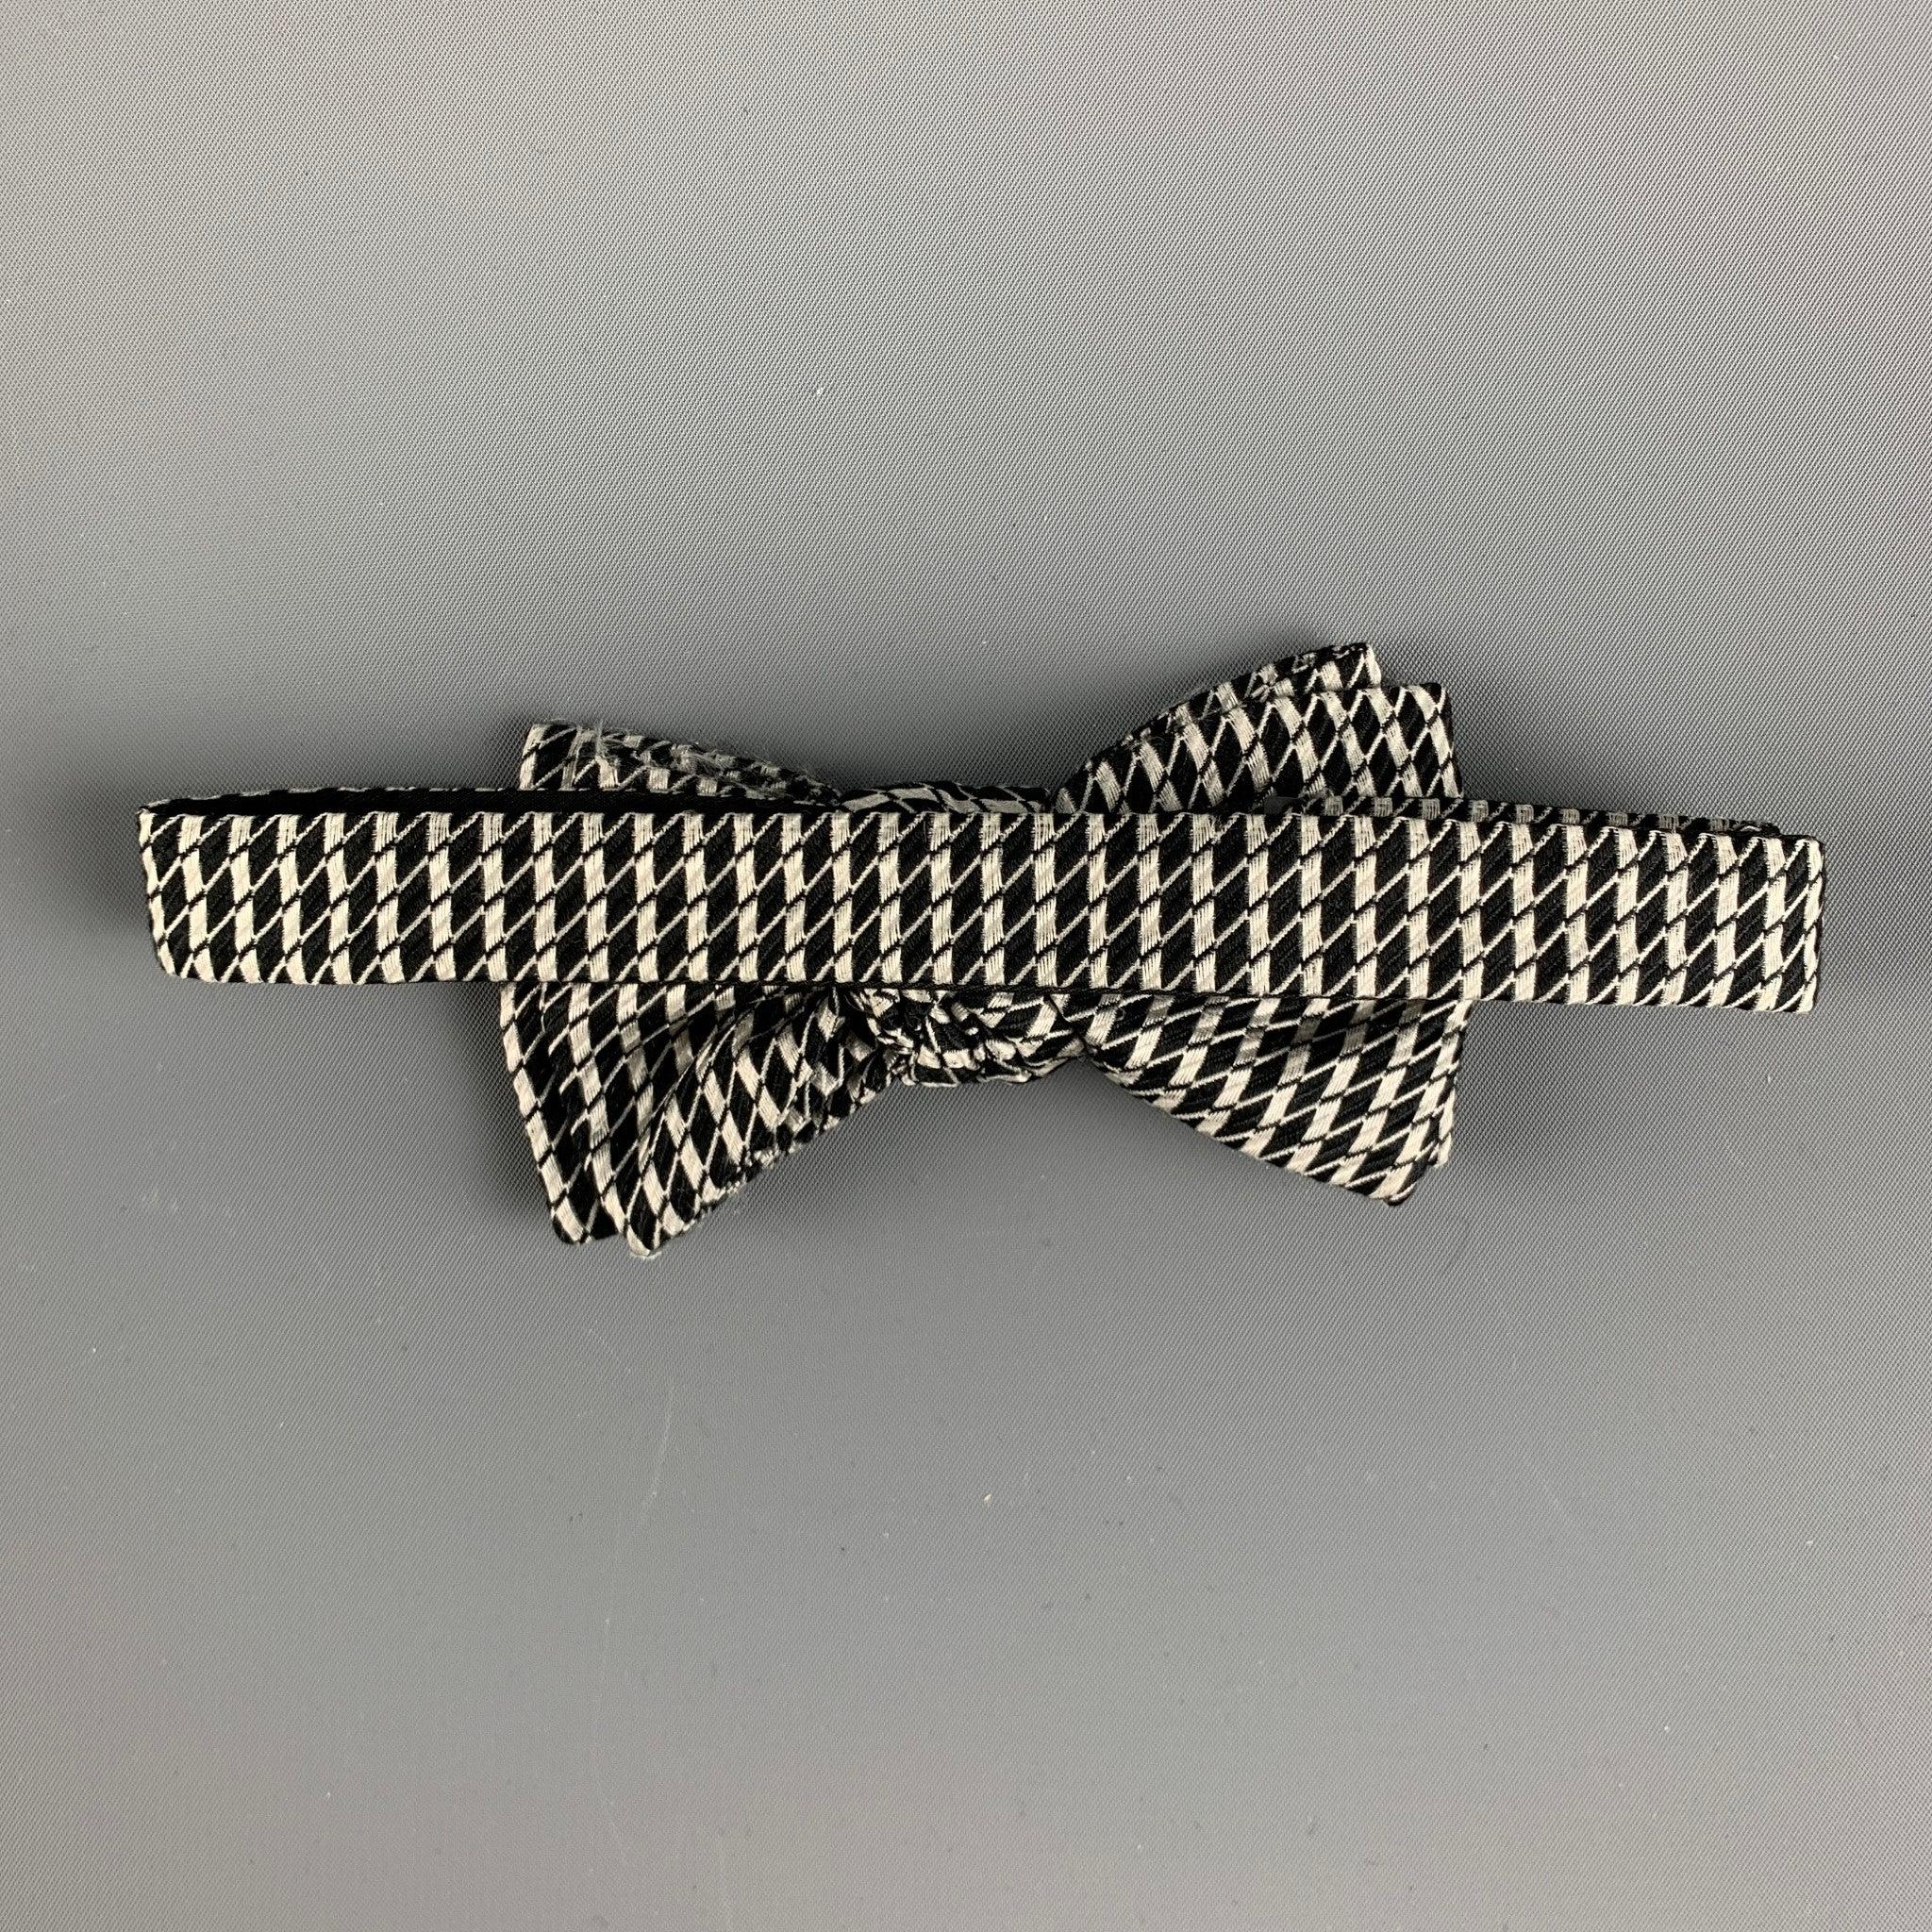 CHARVET pre-tied bow tie comes in a black & white striped silk jacquard with an adjustable fit. Made in France.Very Good Pre-Owned Condition.Width: 2 inches 

  
  
 
Reference: 125470
Category: Bow Tie
More Details
    
Brand:  CHARVET
Gender: 